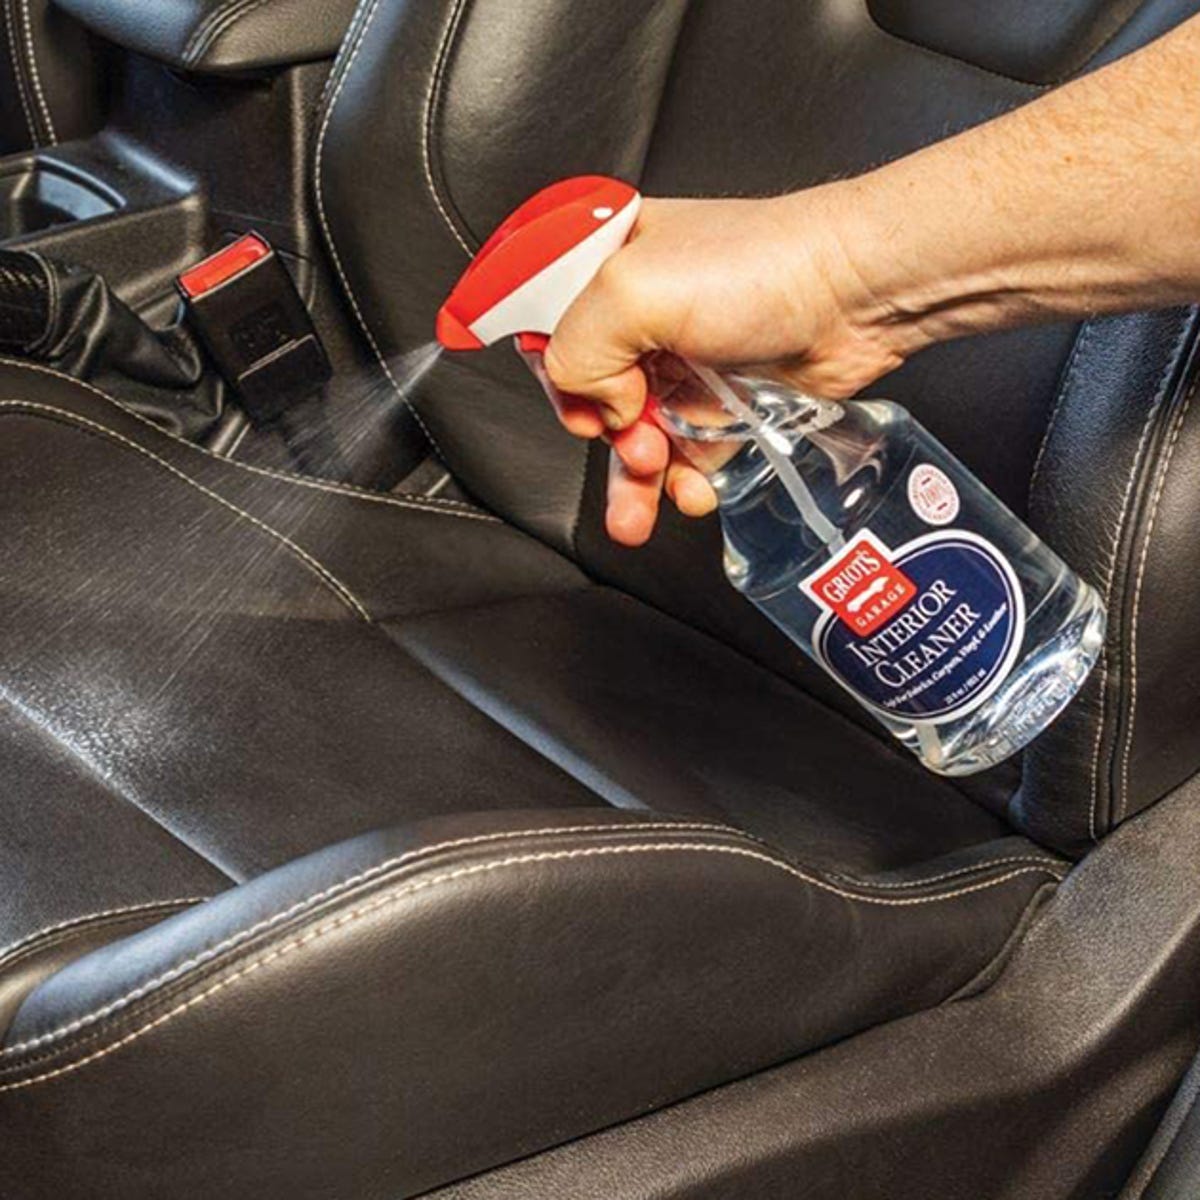 This $17 cleaner will make your car's interior look brand new